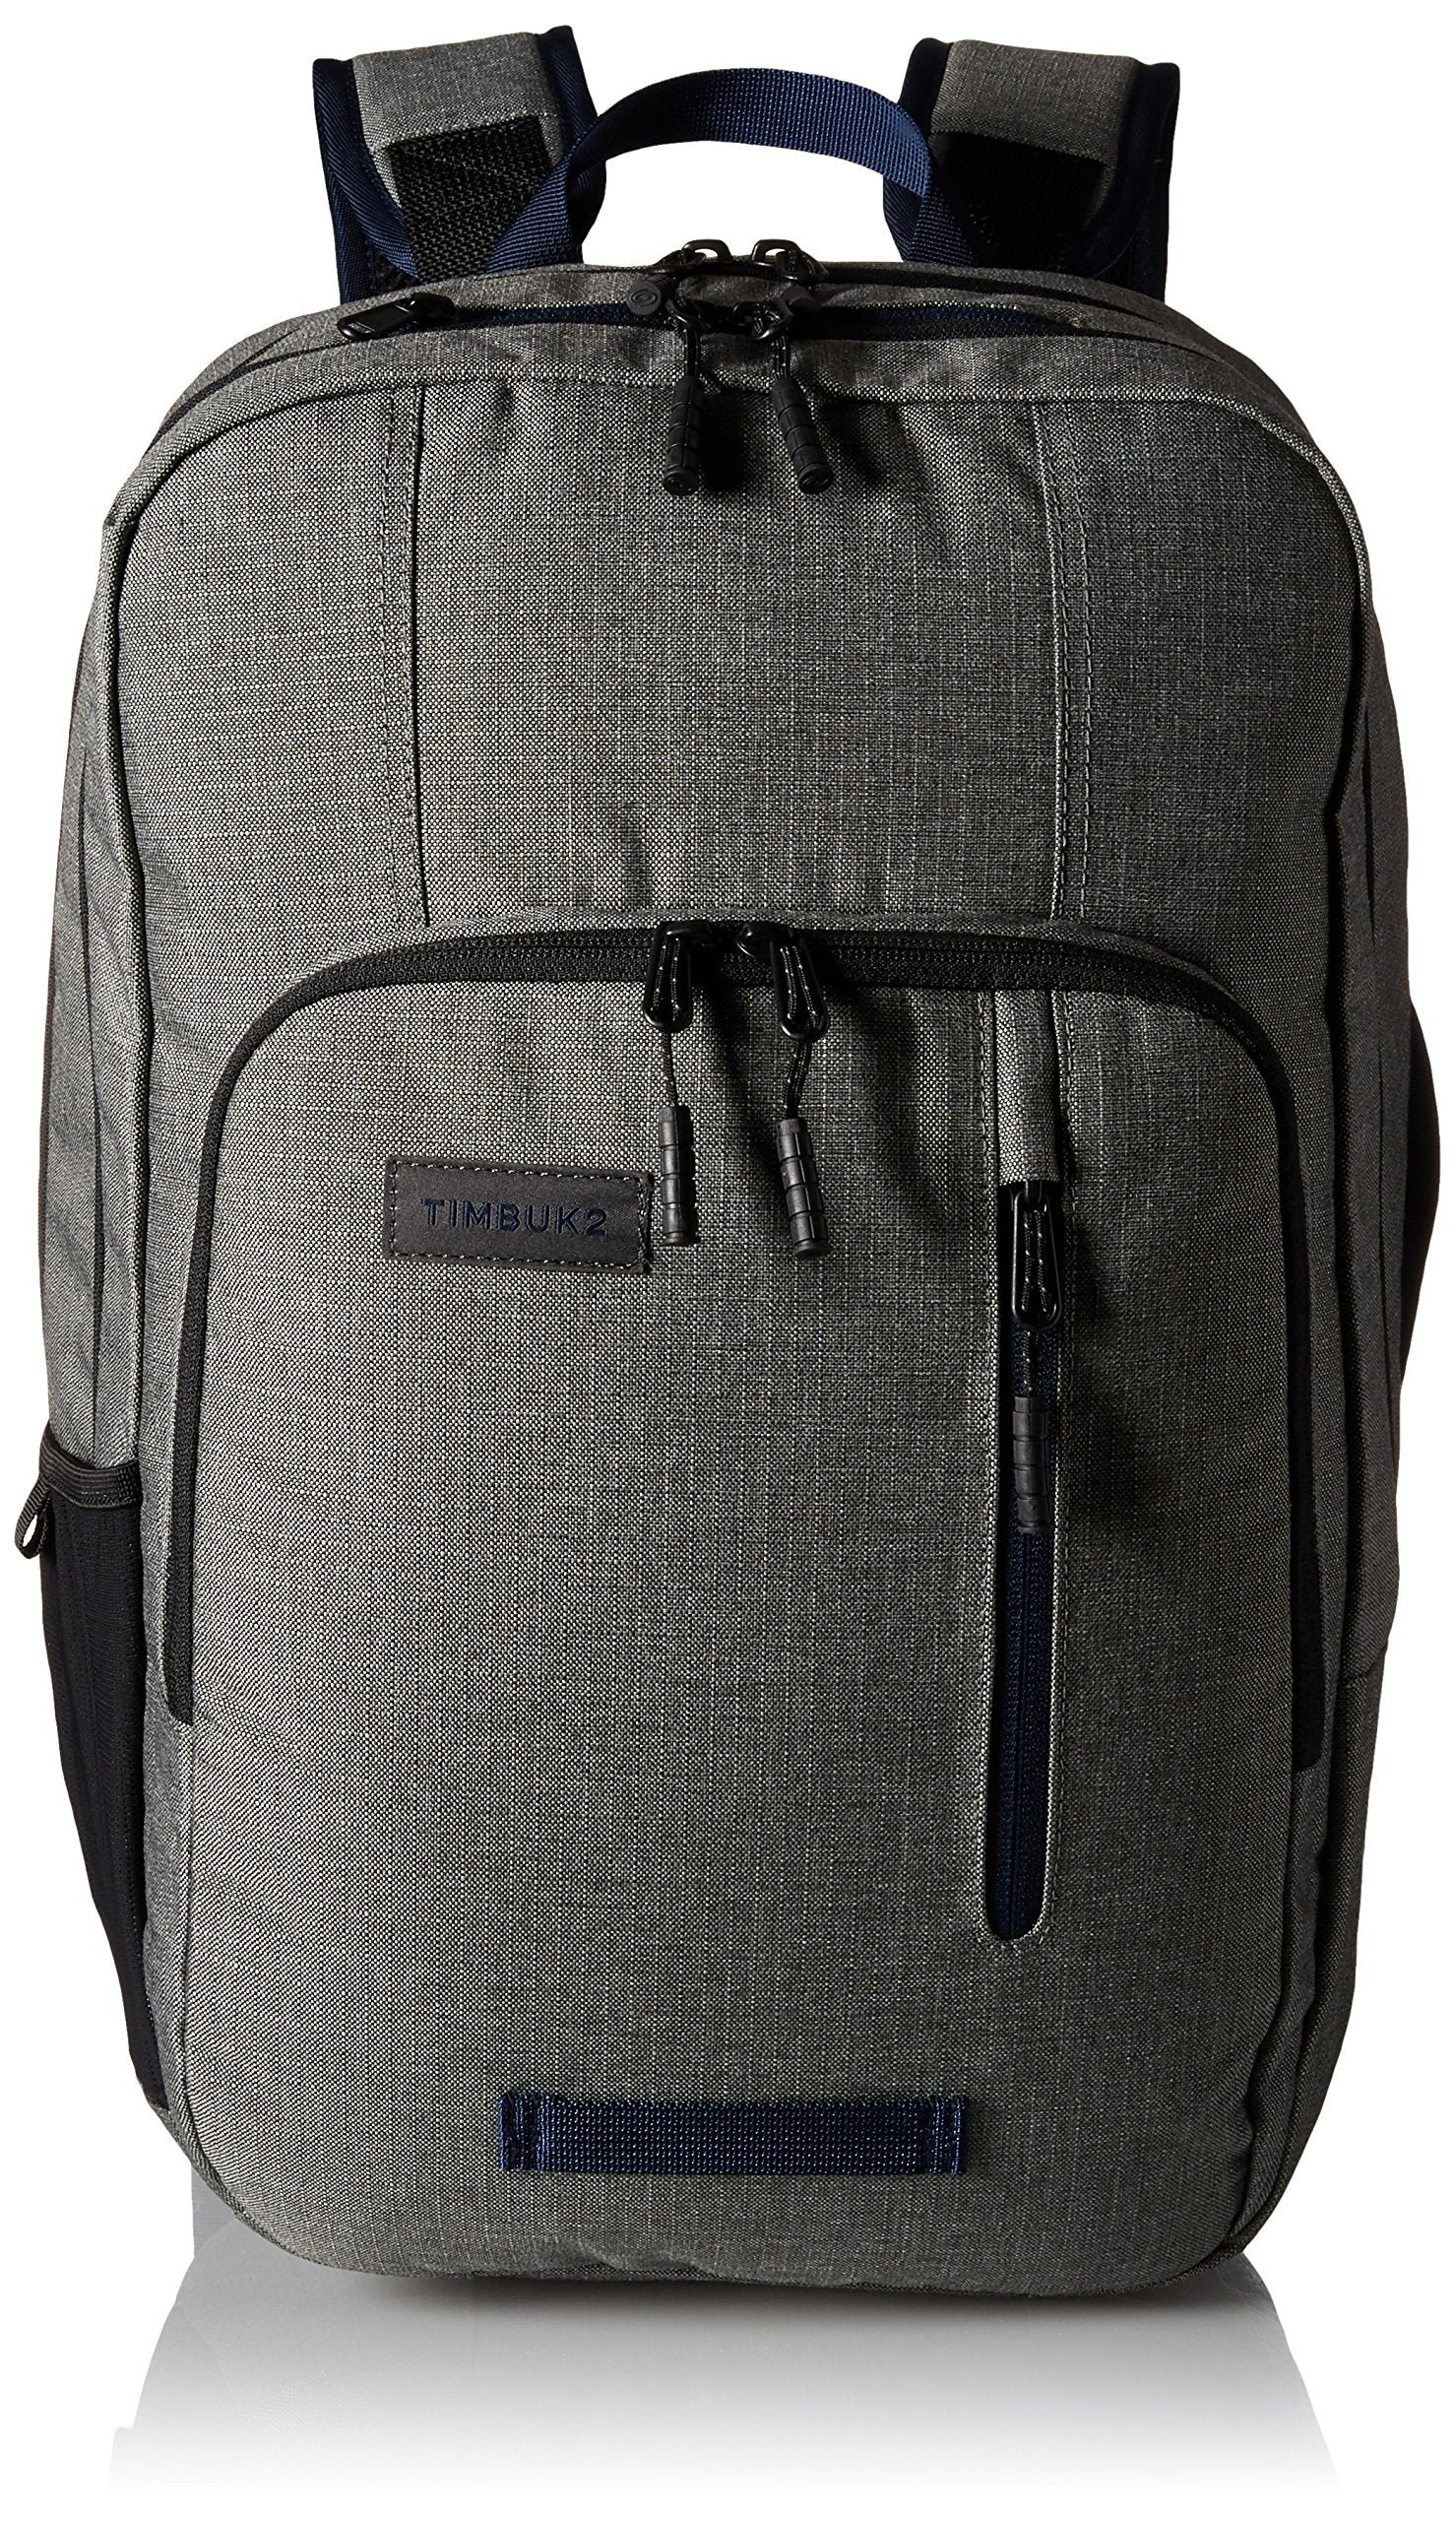 Timbuk2 Uptown Travel-Friendly Laptop Backpack, Midway , One Size ...